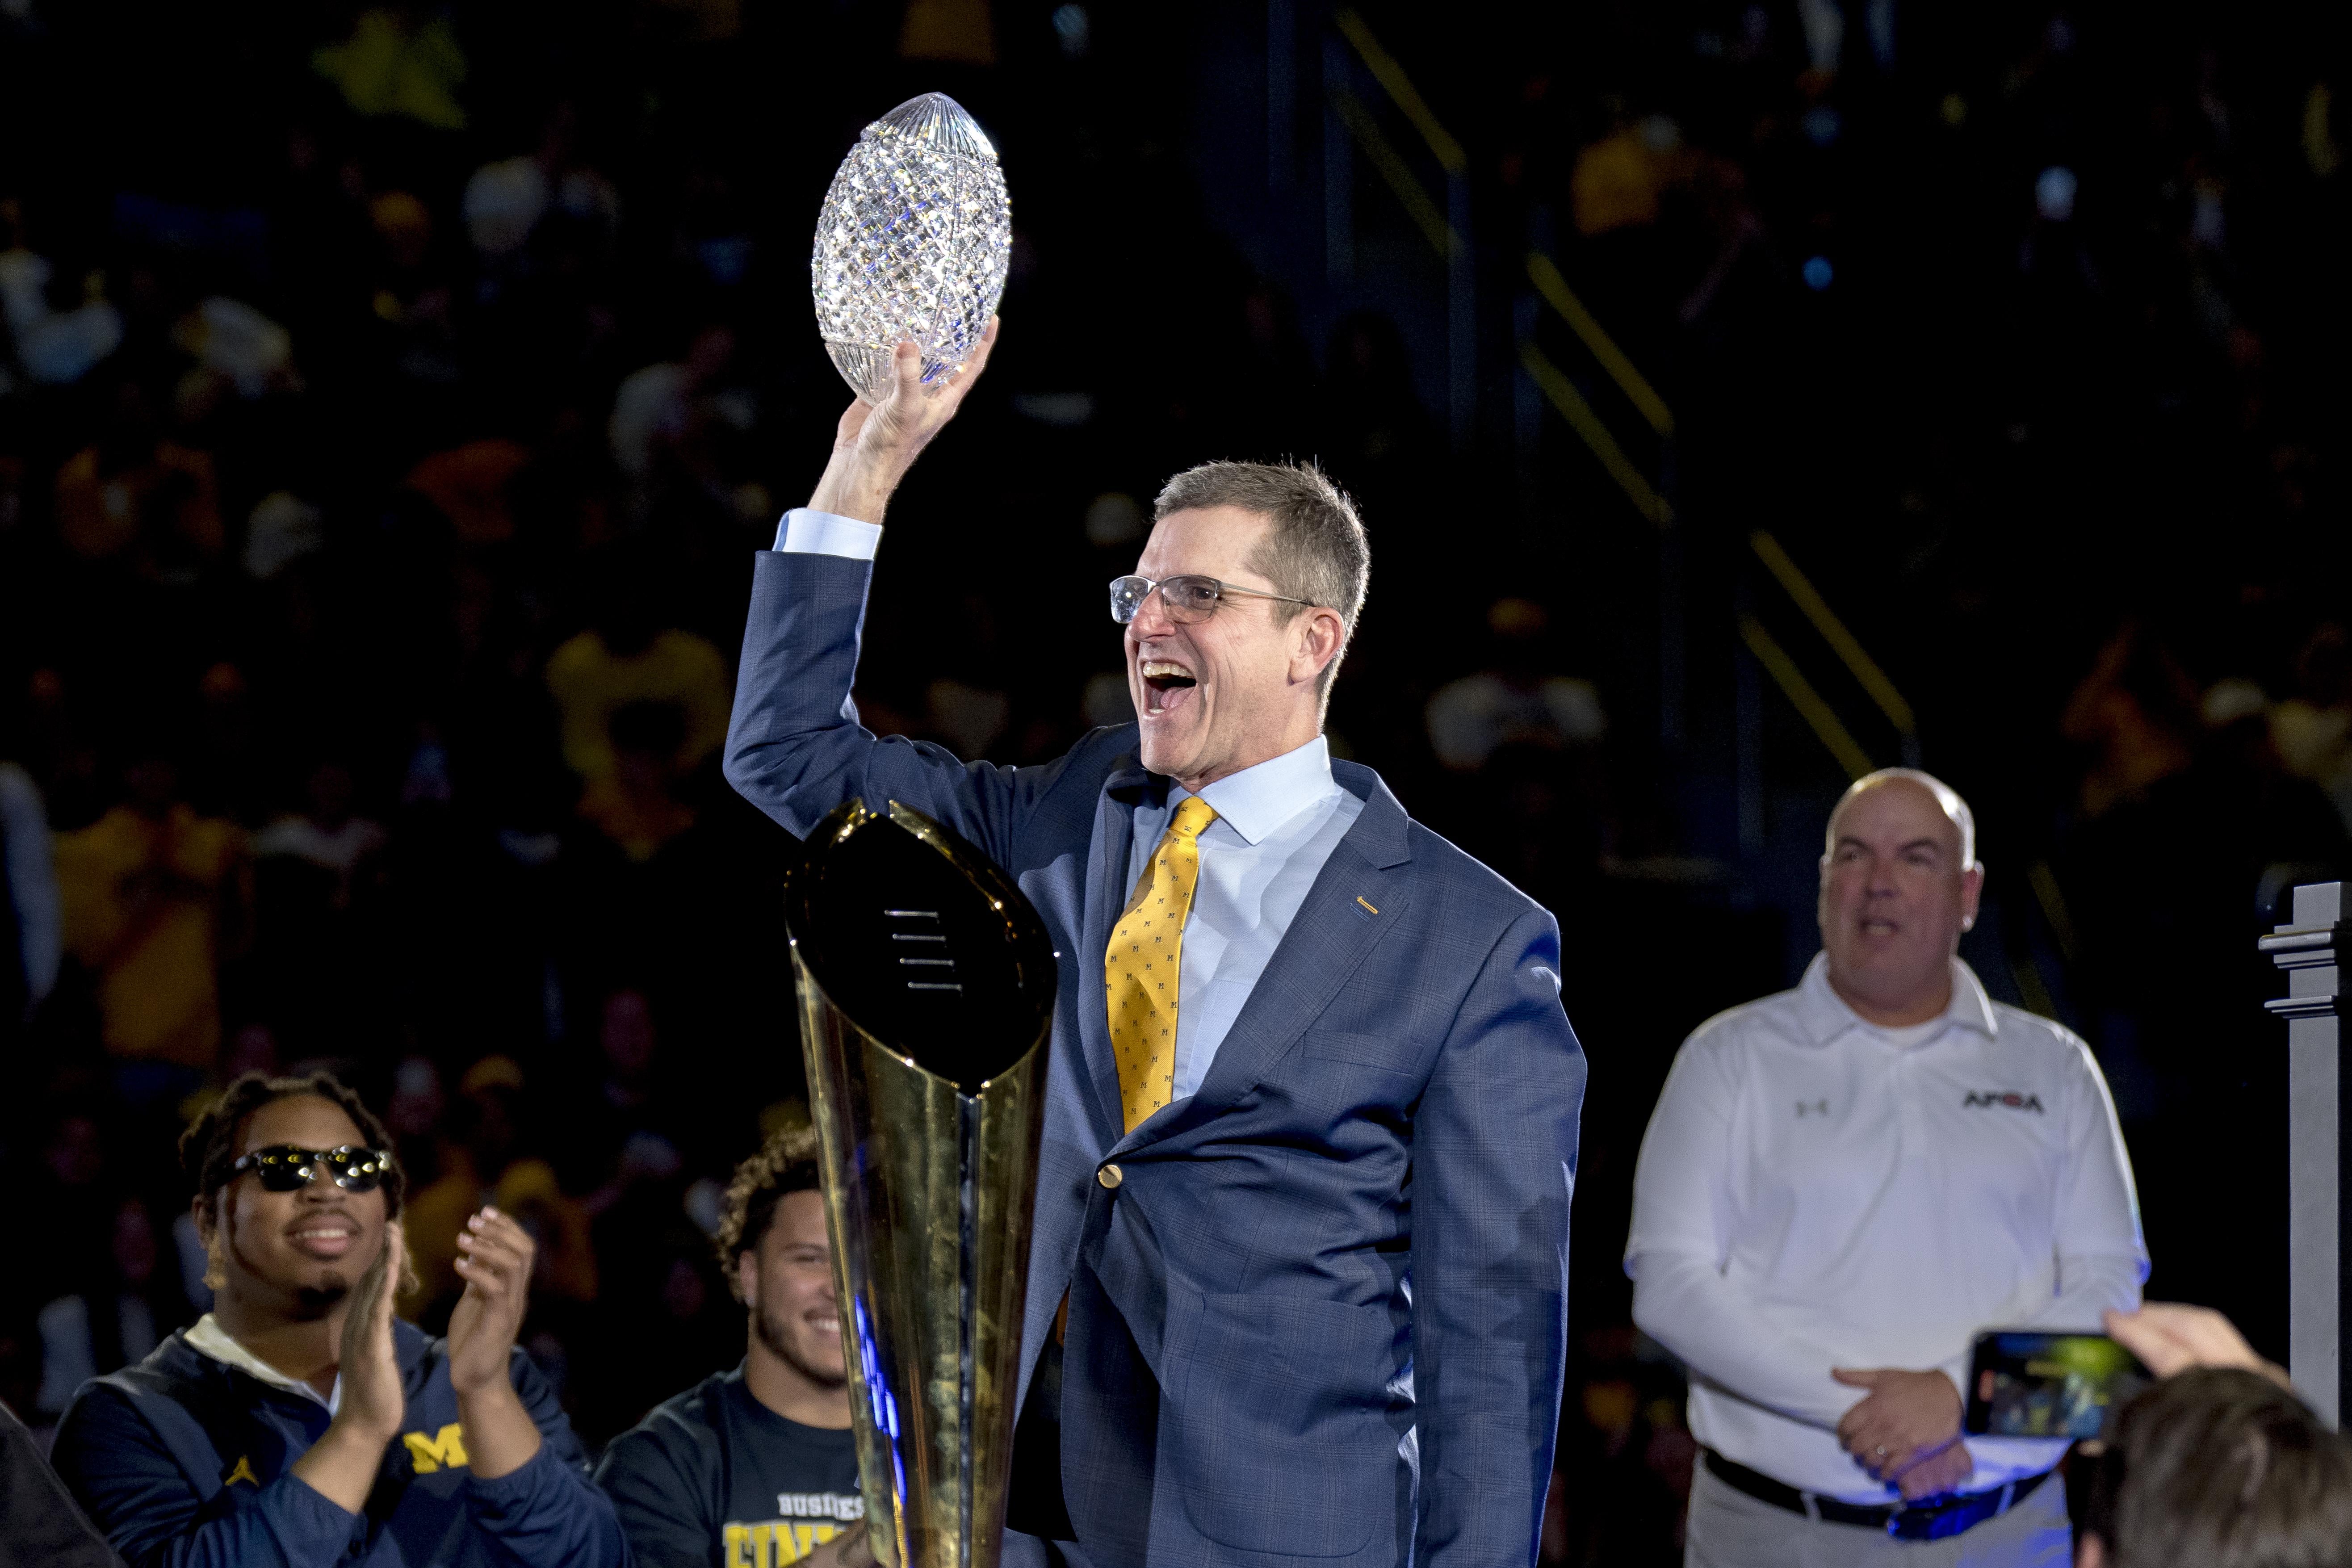 Harbaugh laughs onstage, holding a glass/crystal football in the air with his right hand, and a large trophy standing in front of him.